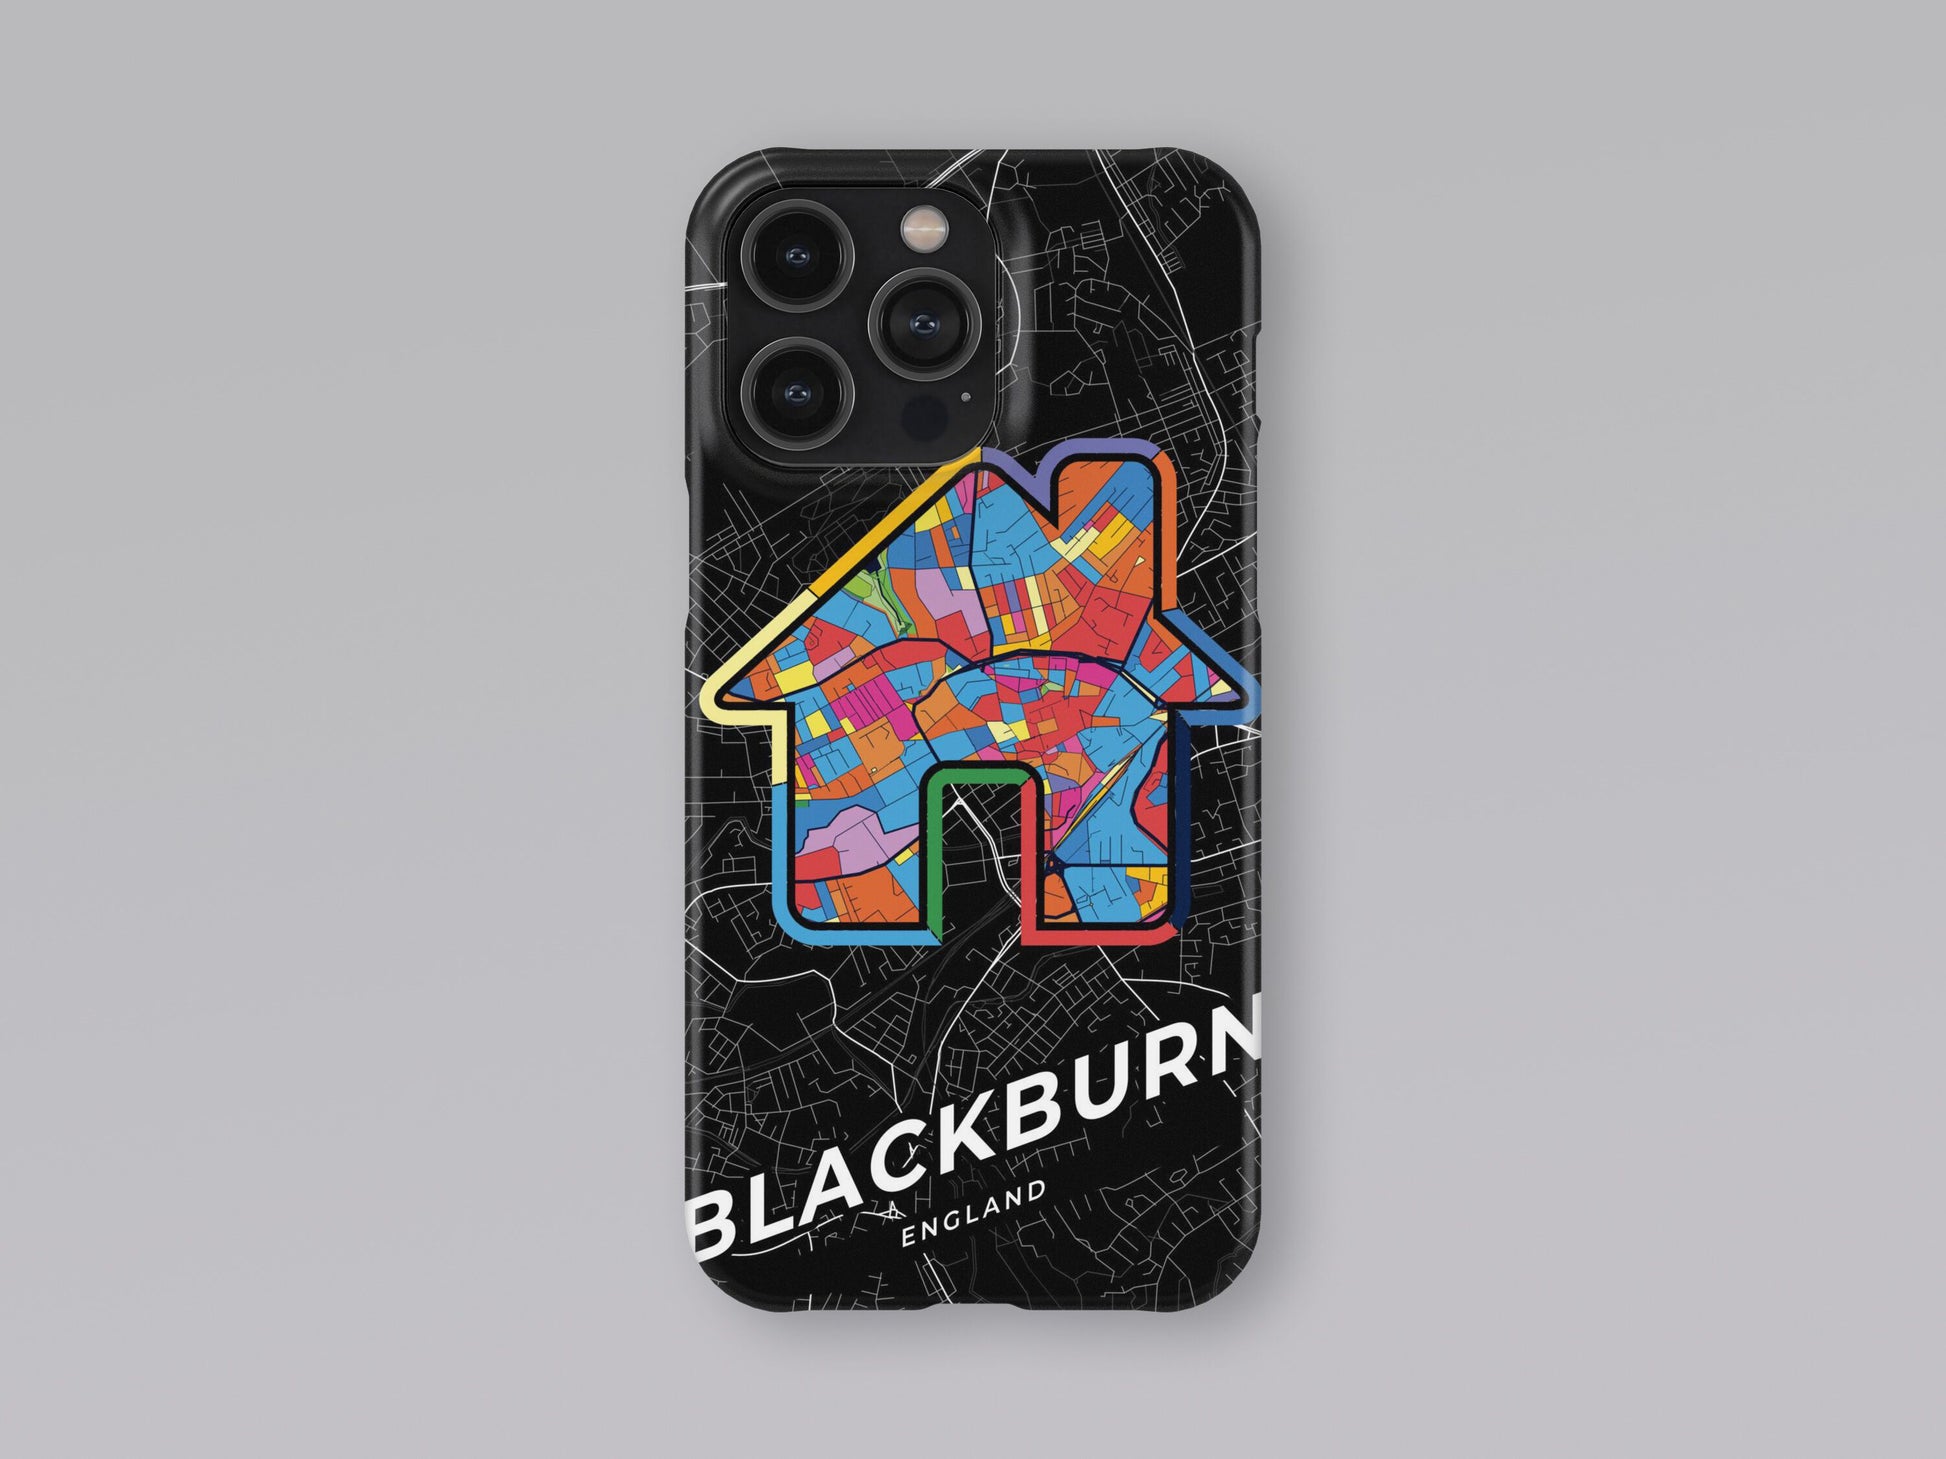 Blackburn England slim phone case with colorful icon. Birthday, wedding or housewarming gift. Couple match cases. 3